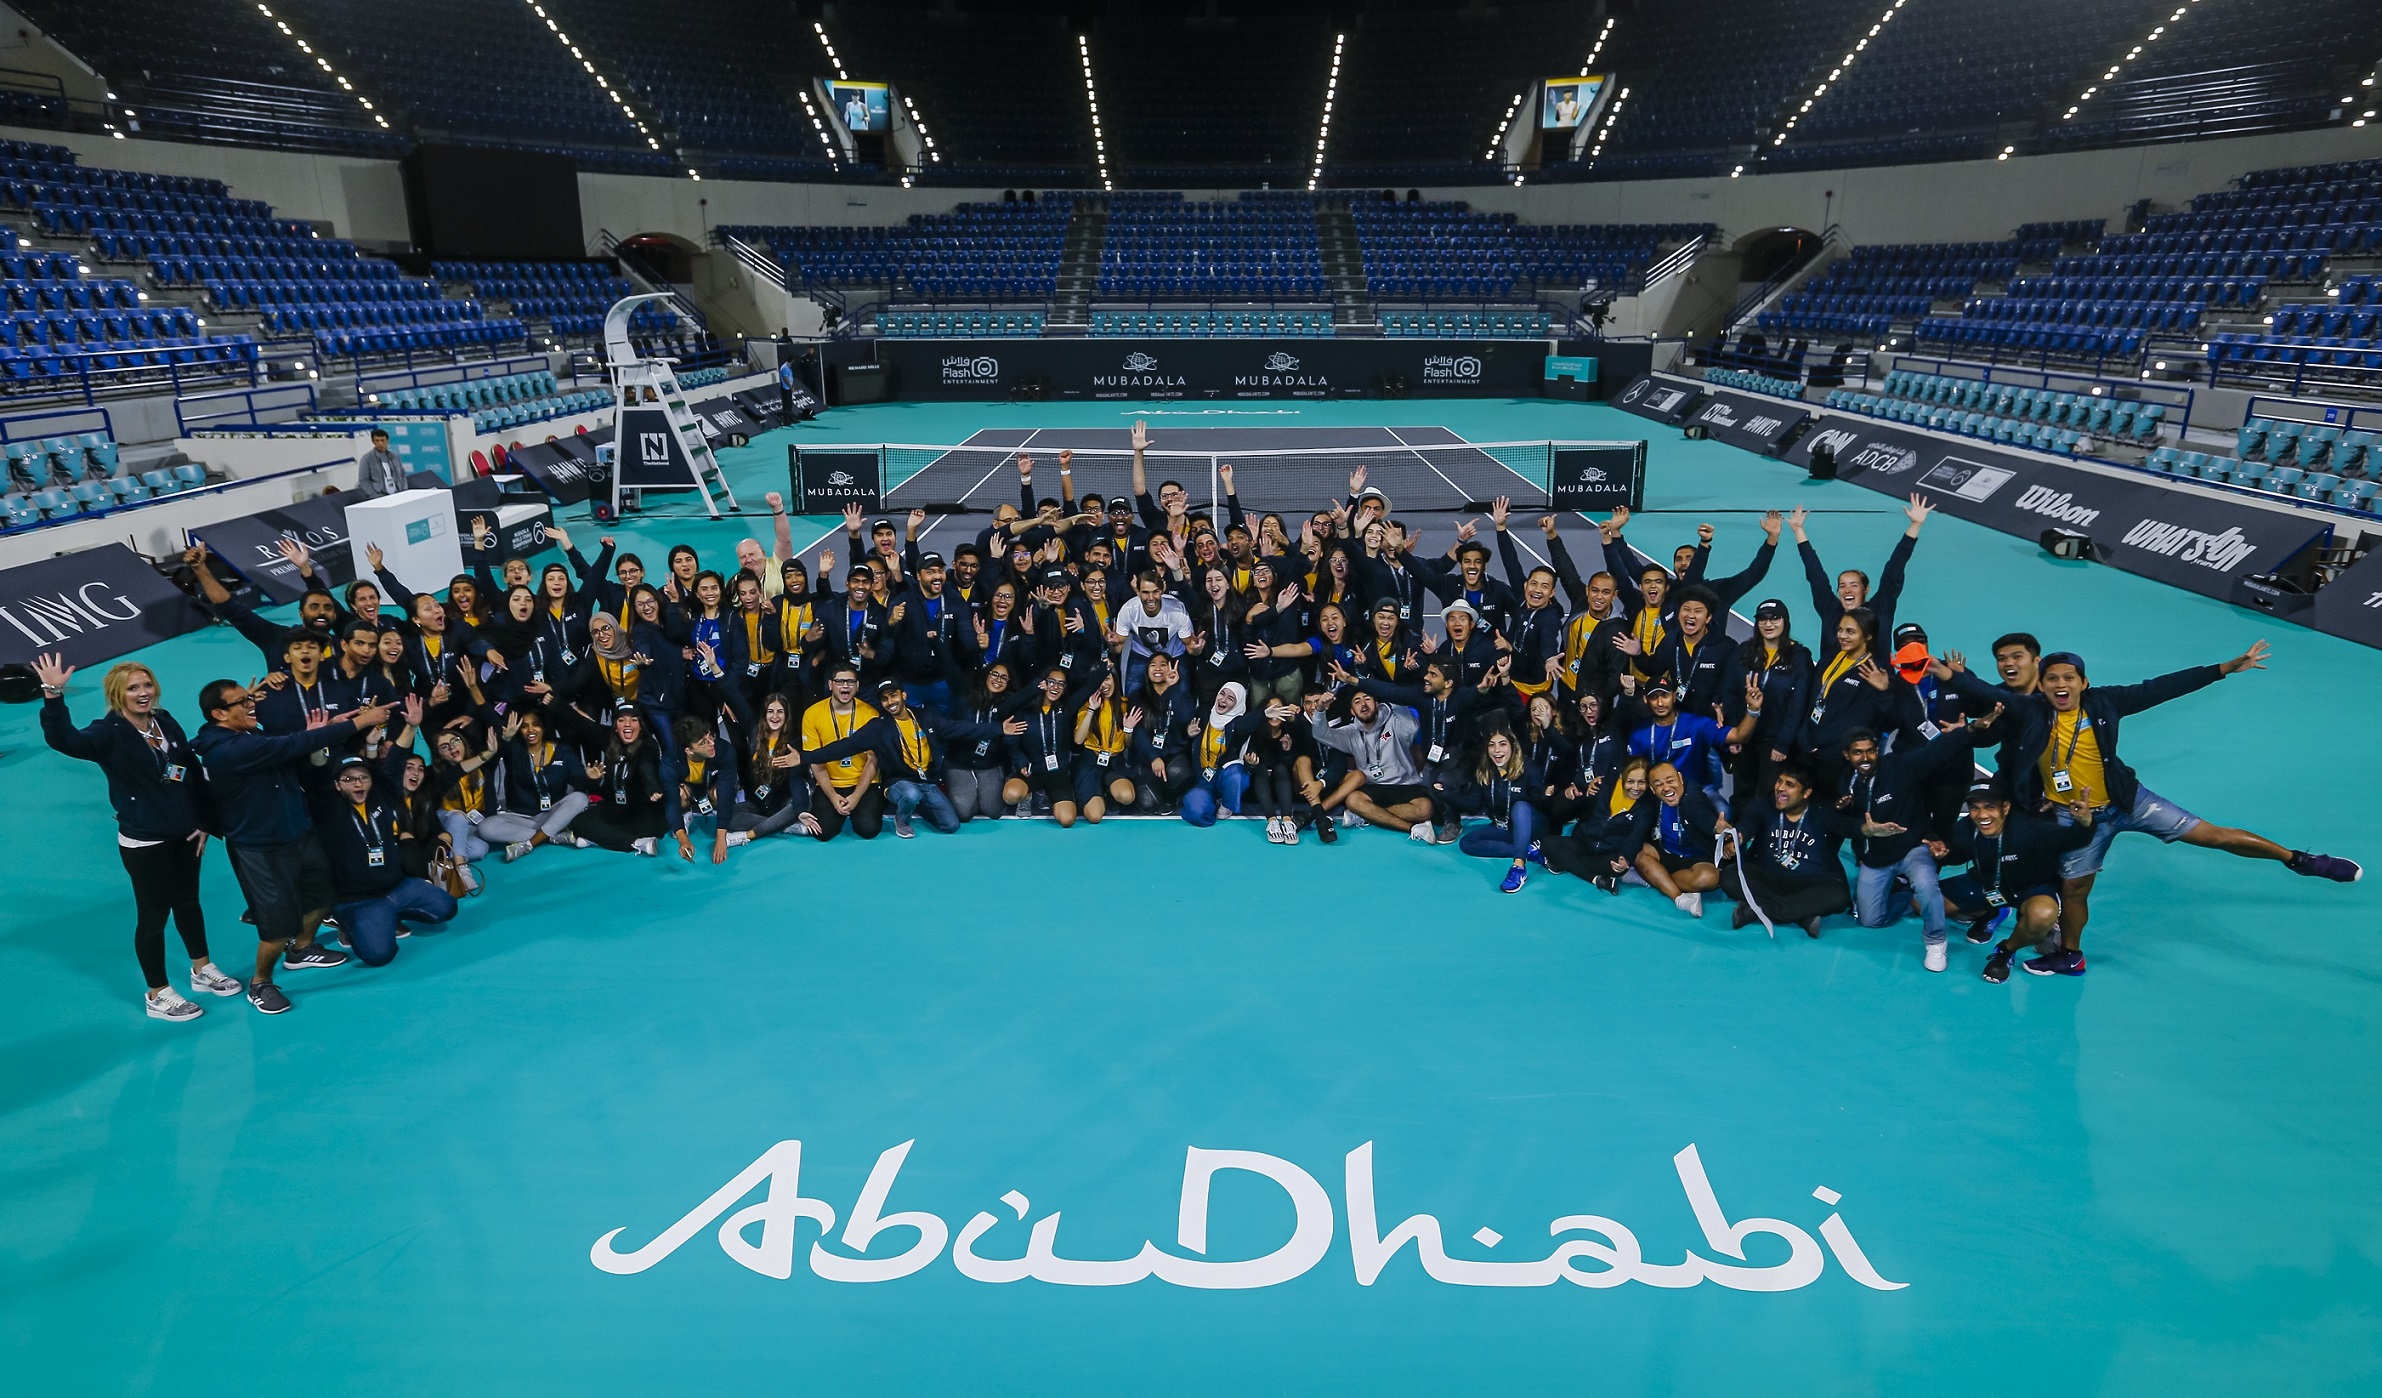 New Roles Please! Time To Get Involved In The Mubadala World Tennis Championship 2021